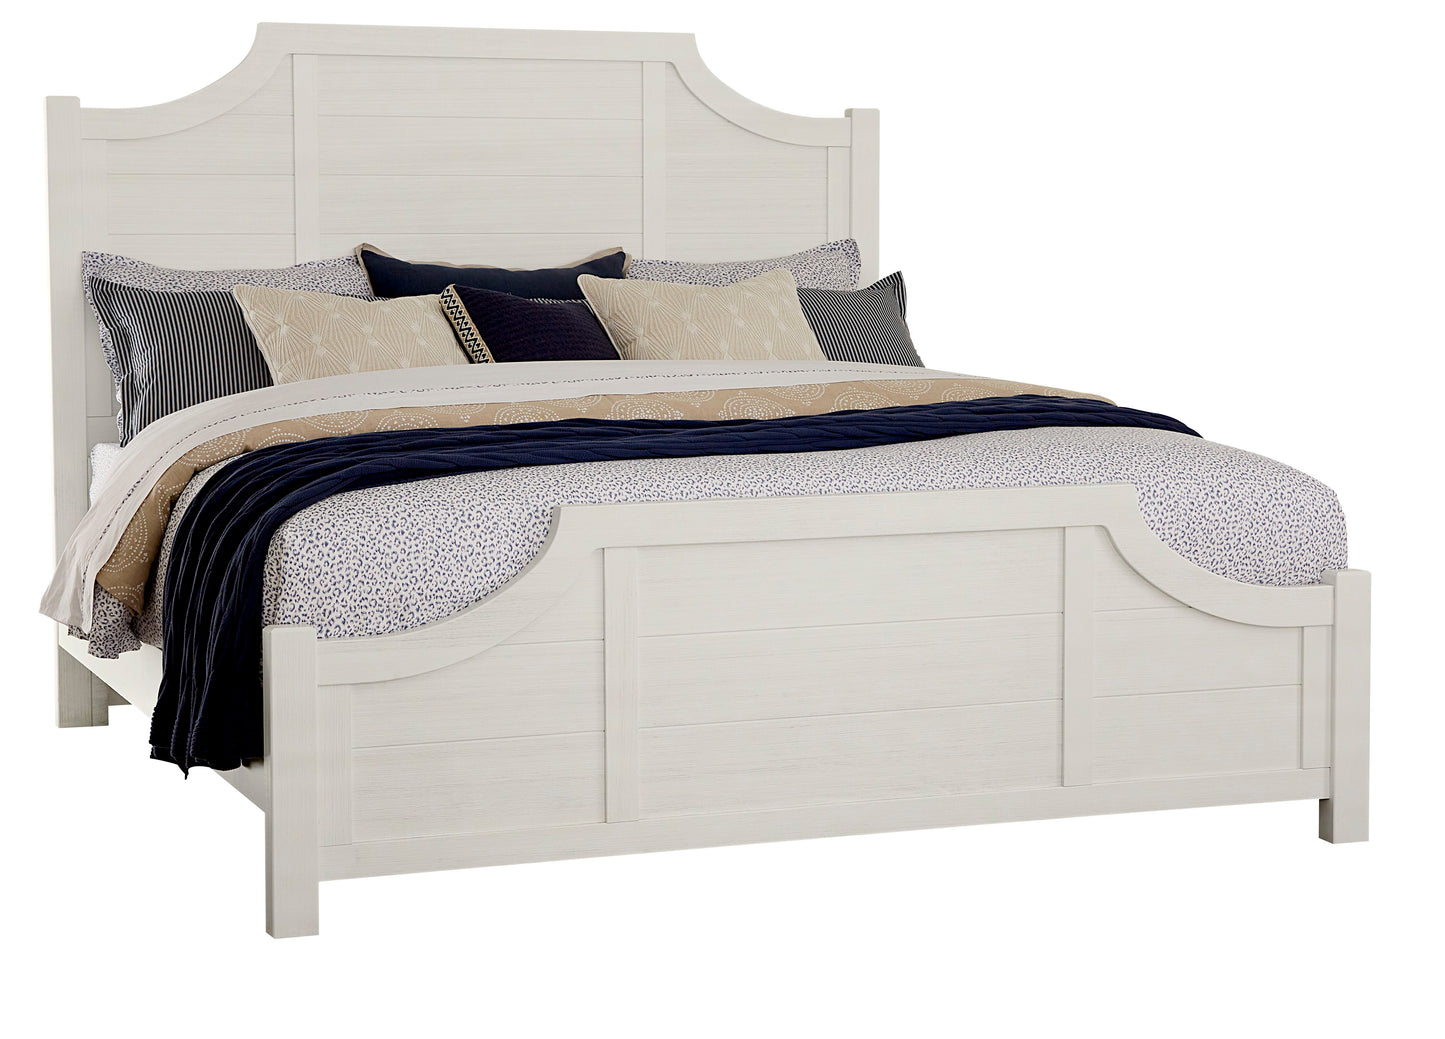 Maple Road - Scalloped Bed